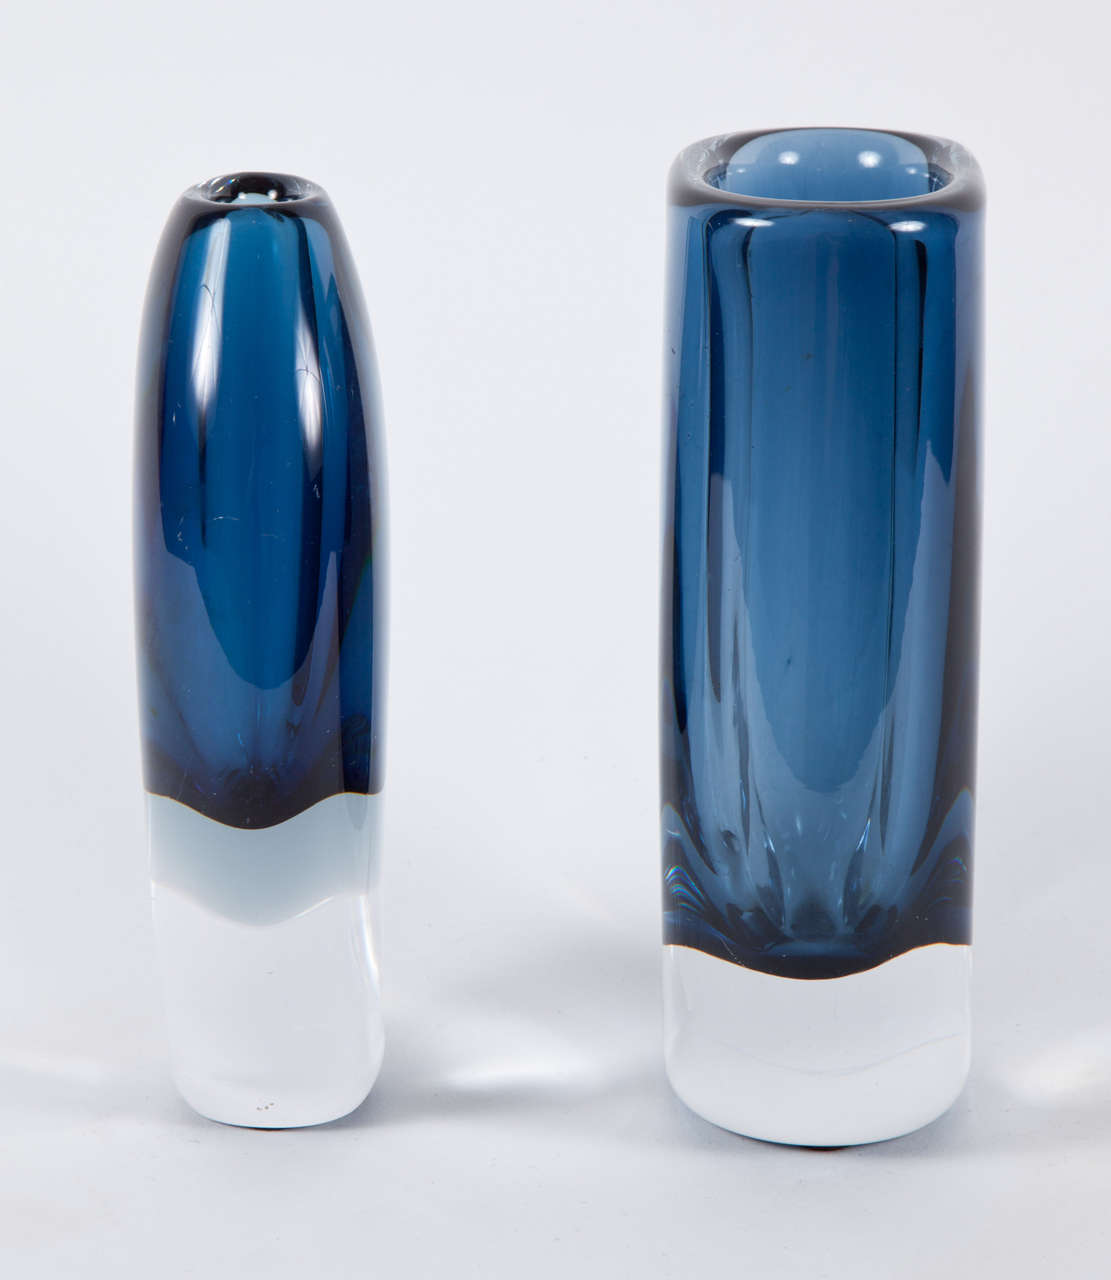 Fantastic set of 2 blue and clear glass vases by Vicke Lindstrand 1 for Orrefors the other for Kosta.

Oval measures 7.25